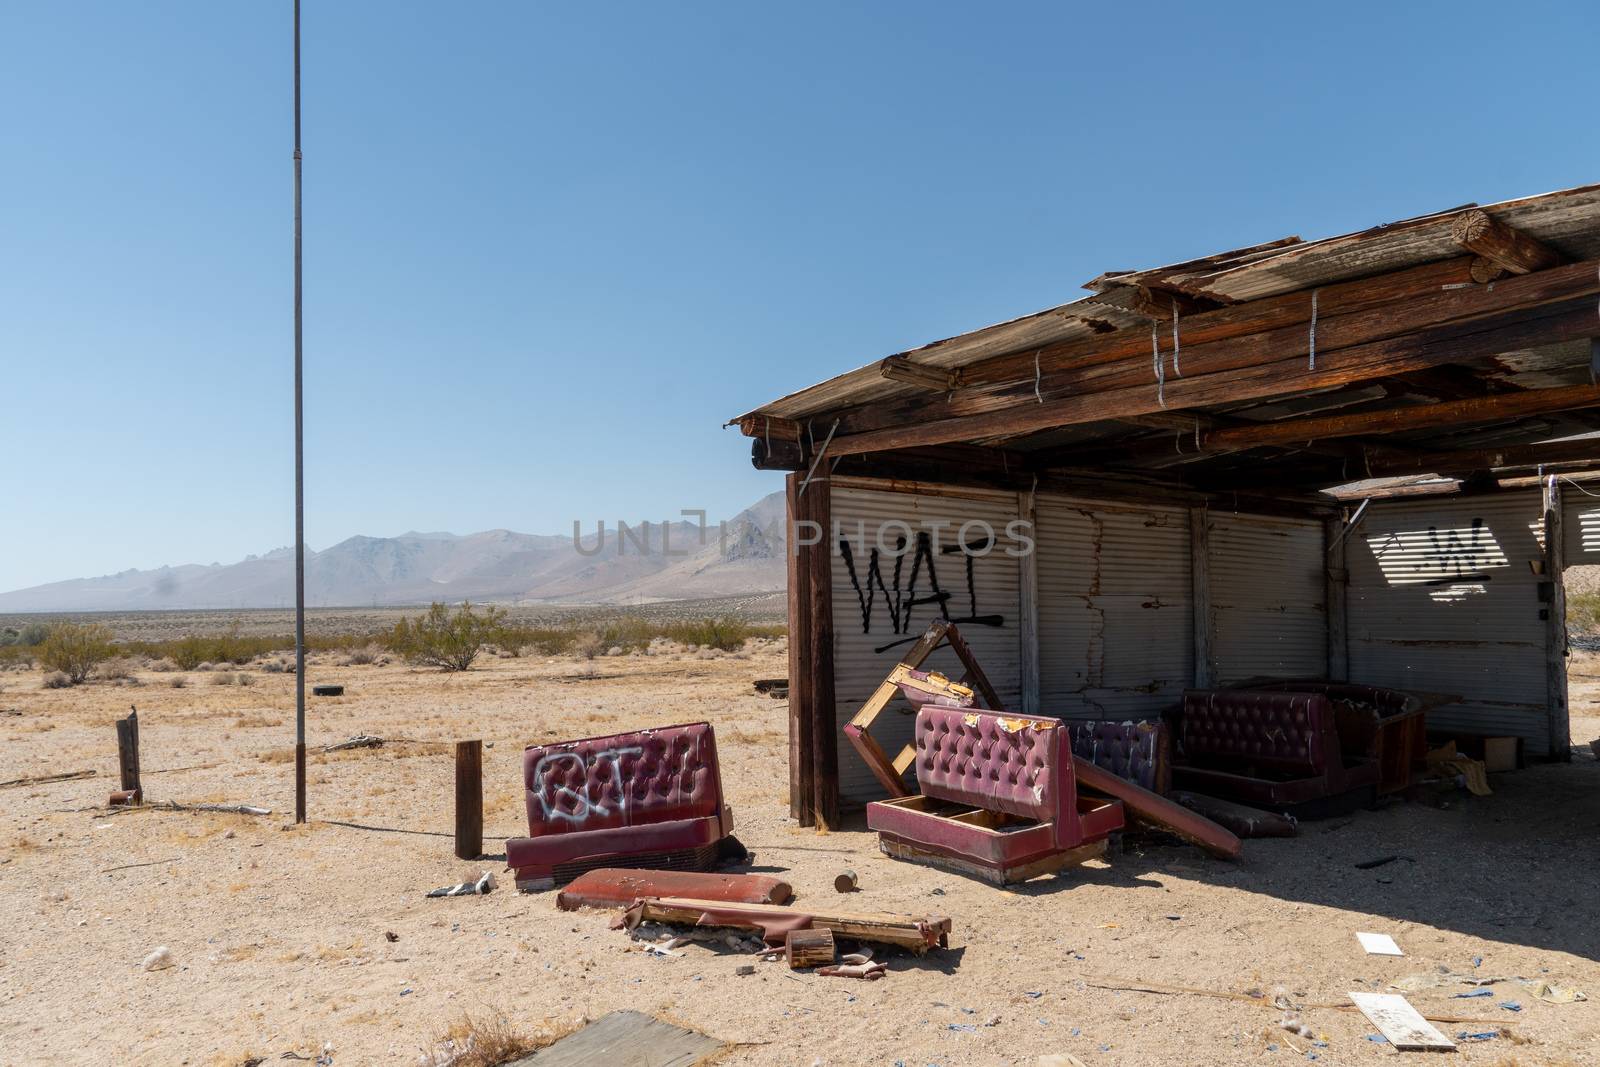 Abandoned houses and camper trailer in the middle of the desert by Bonandbon